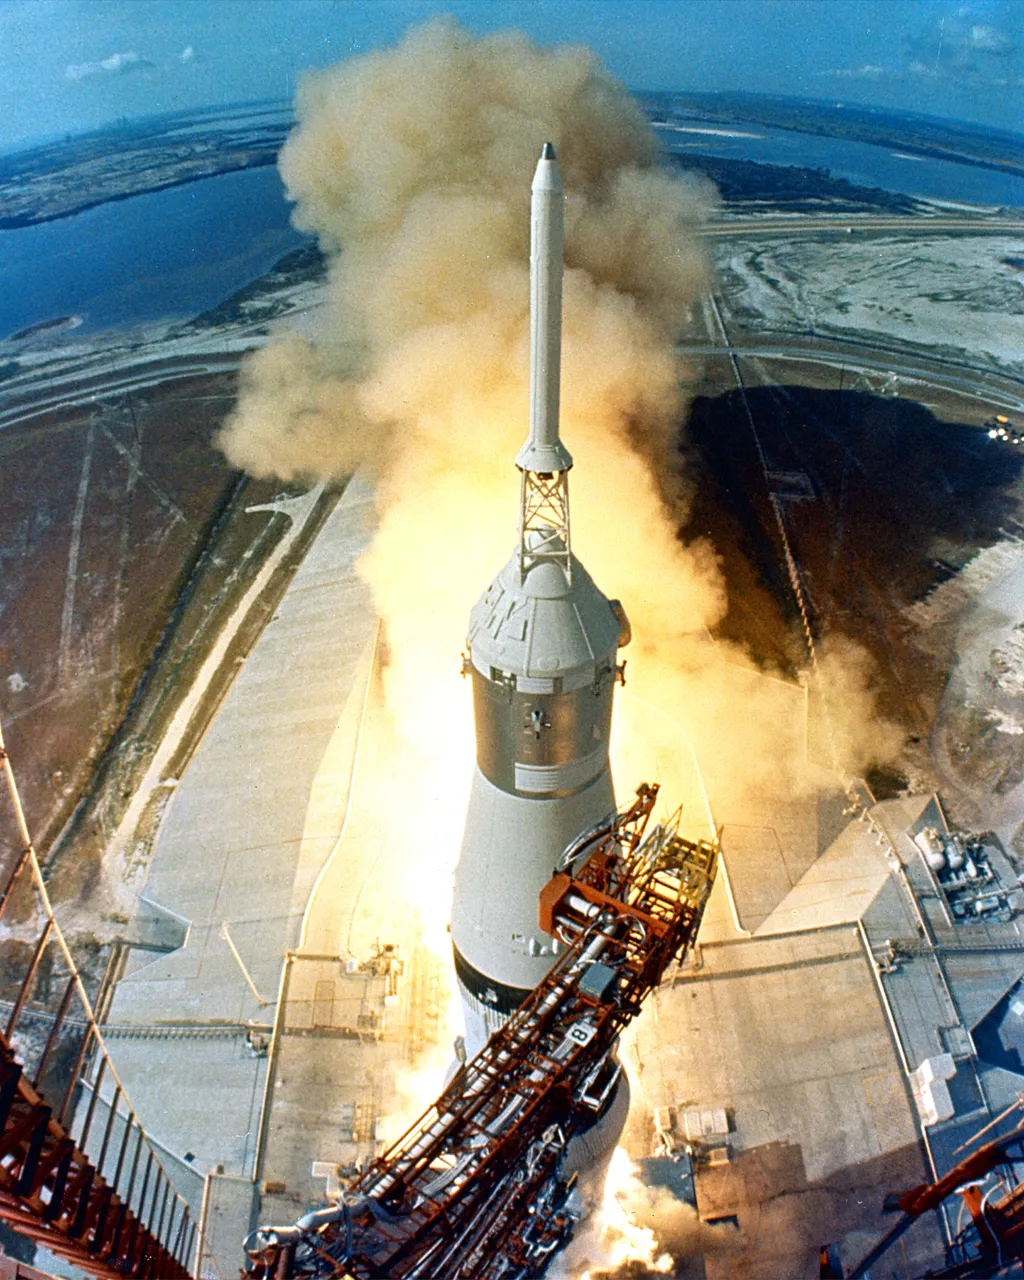 Apollo 11 Saturn V Launch At 9:32 a.m. EDT, the swing arms move away and a plume of flame signals the liftoff of the Apollo 11 Saturn V space vehicle and astronauts Neil A. Armstrong, Michael Collins and Edwin E. Aldrin, Jr. from Kennedy Space Center Laun